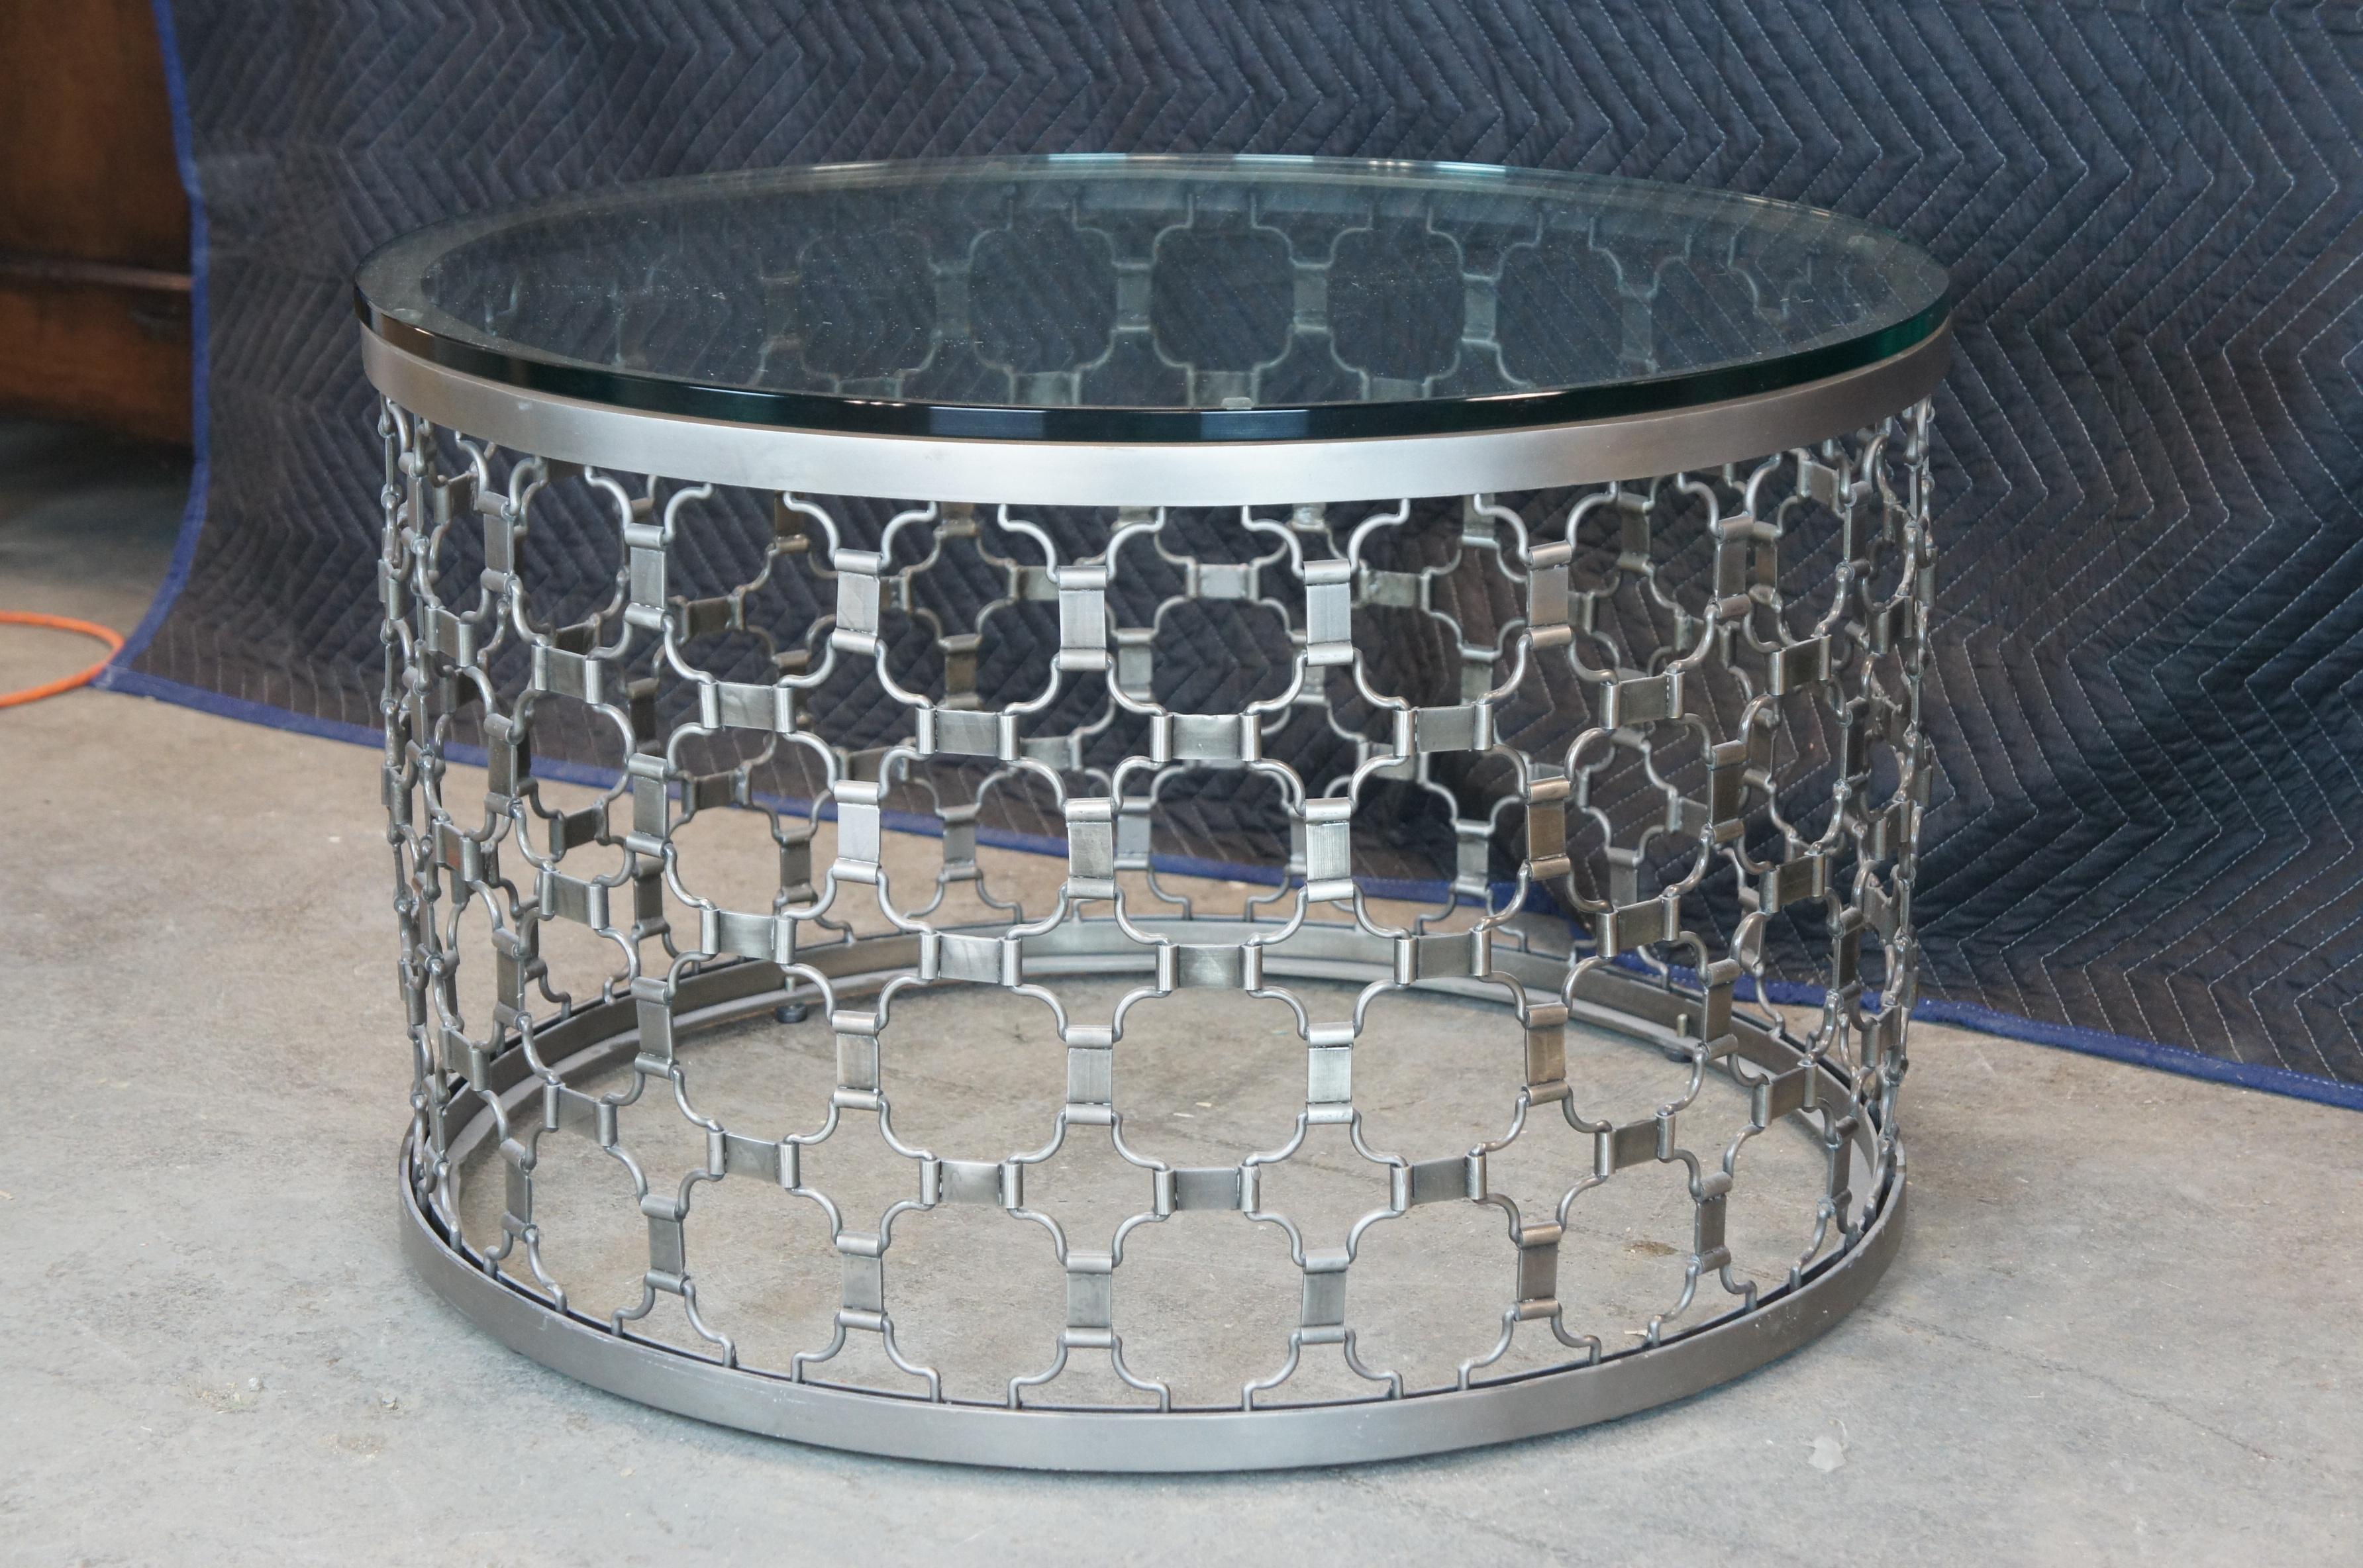 Arhaus Naomi coffe or accent table in Pewter finish. A nice mix of contemporaryy and modern styling. Made of aluminum featuring reticulated geometric design with glass top featuring polished edge. Retail $1799 each. Measures: 30''.
   